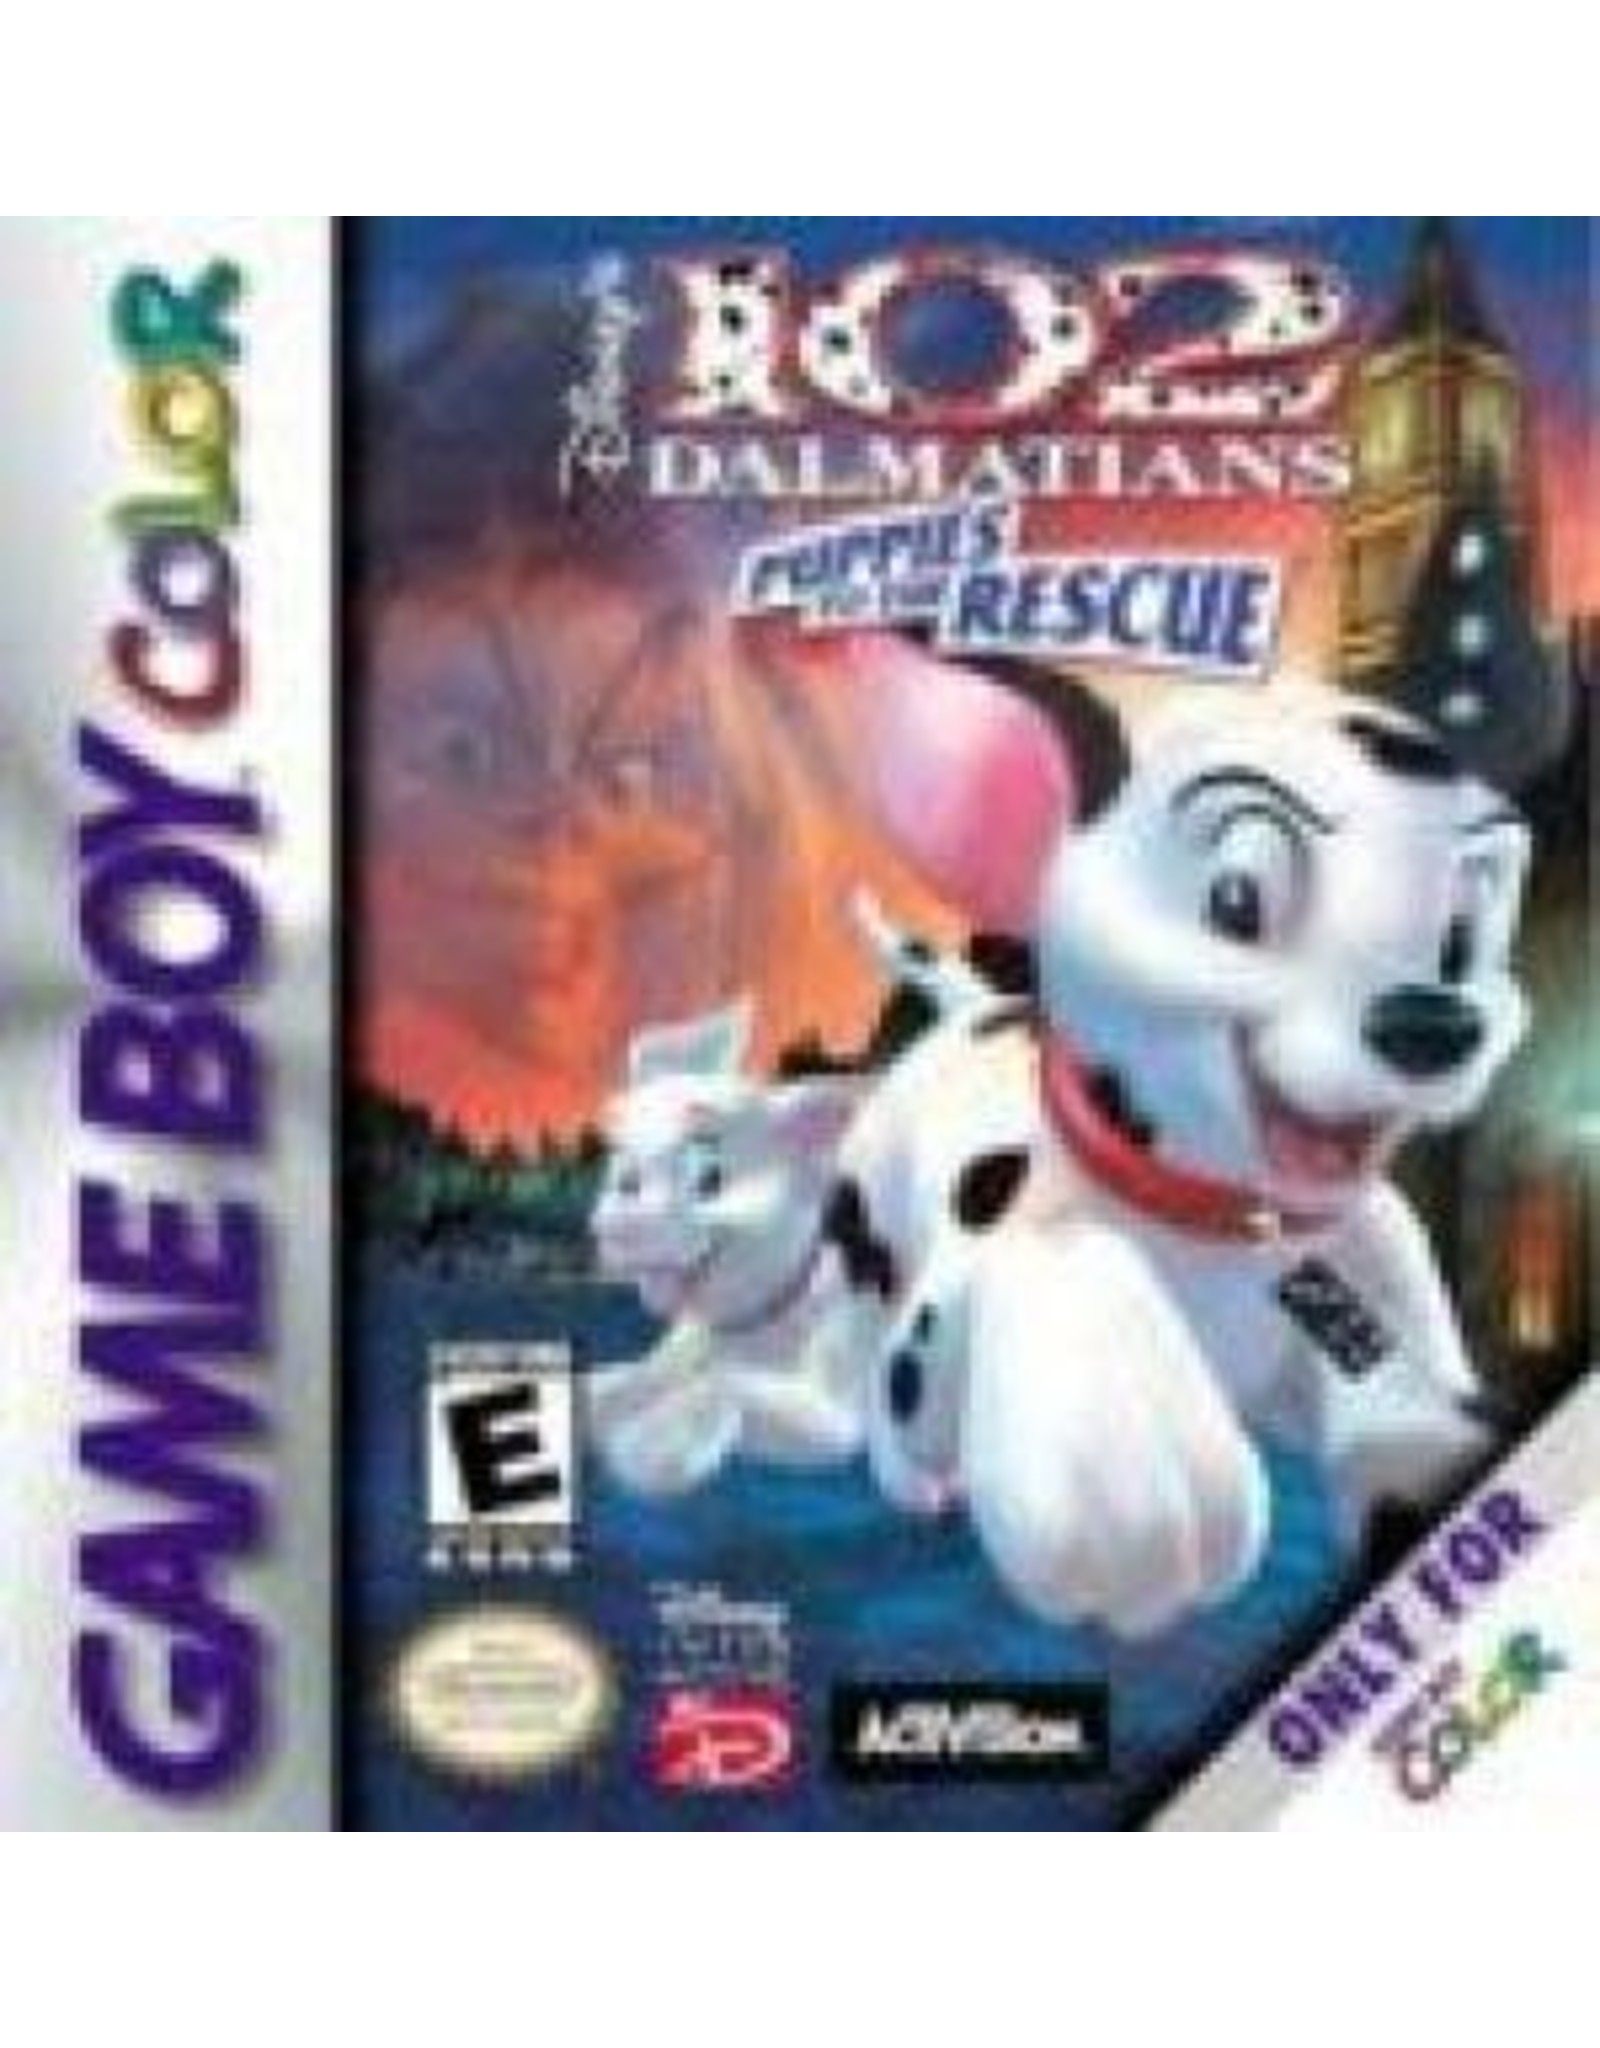 Game Boy Color 102 Dalmatians Puppies to the Rescue (Cart Only, Damaged Label)